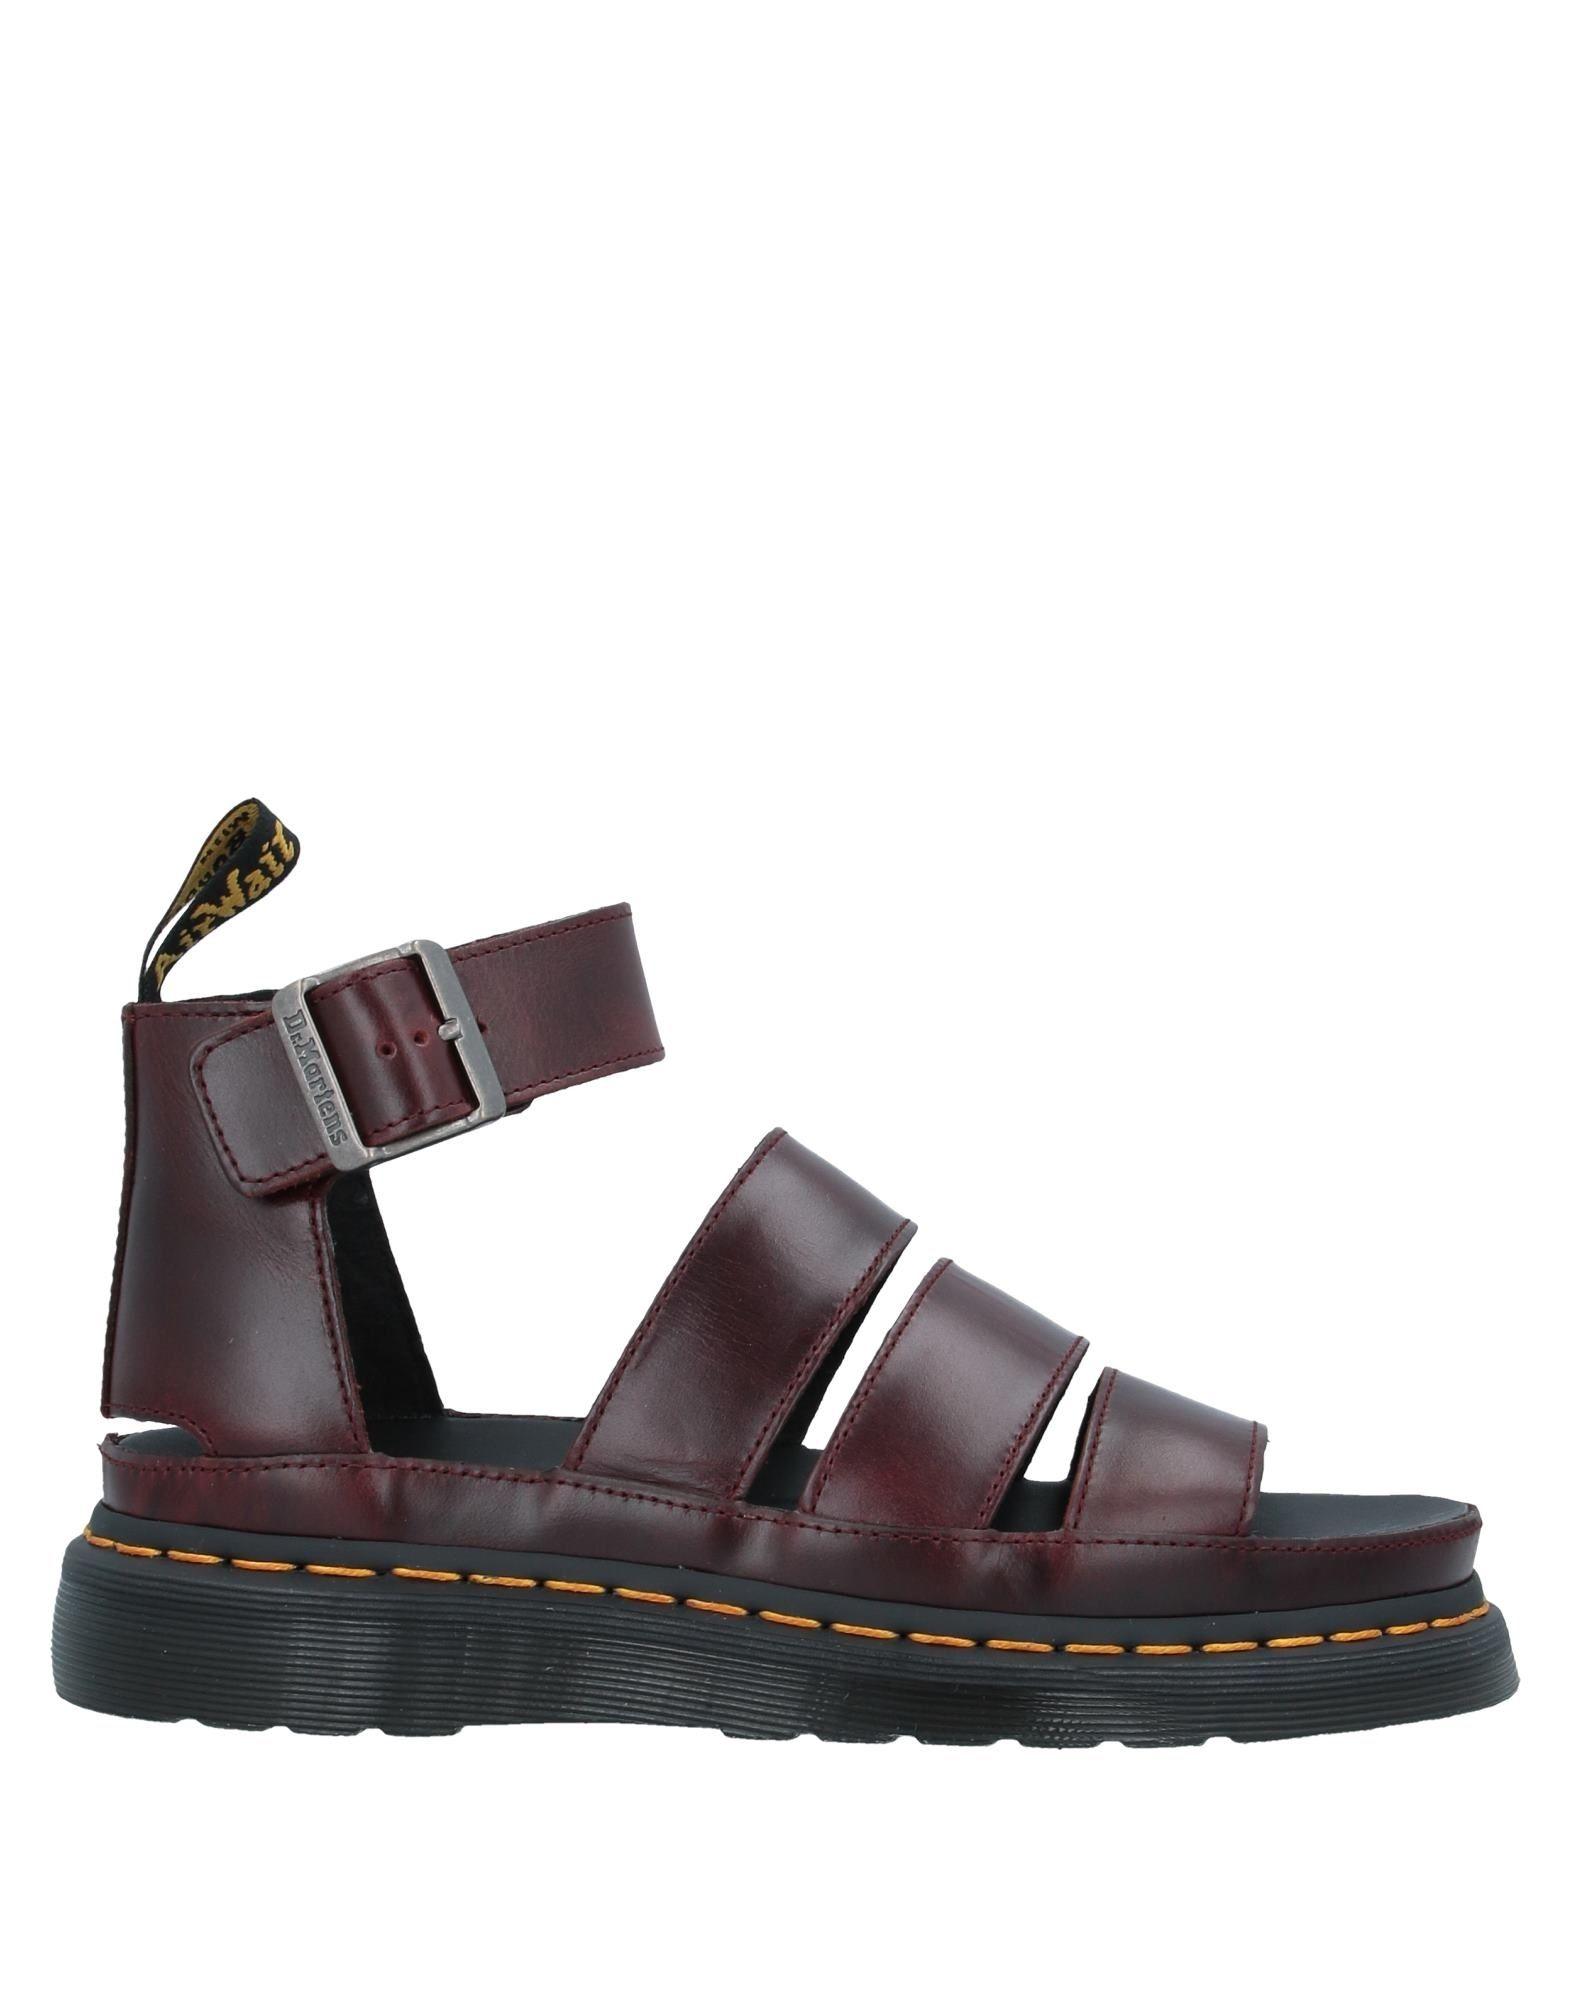 Dr. Martens Leather Sandals in Cocoa (Brown) - Lyst